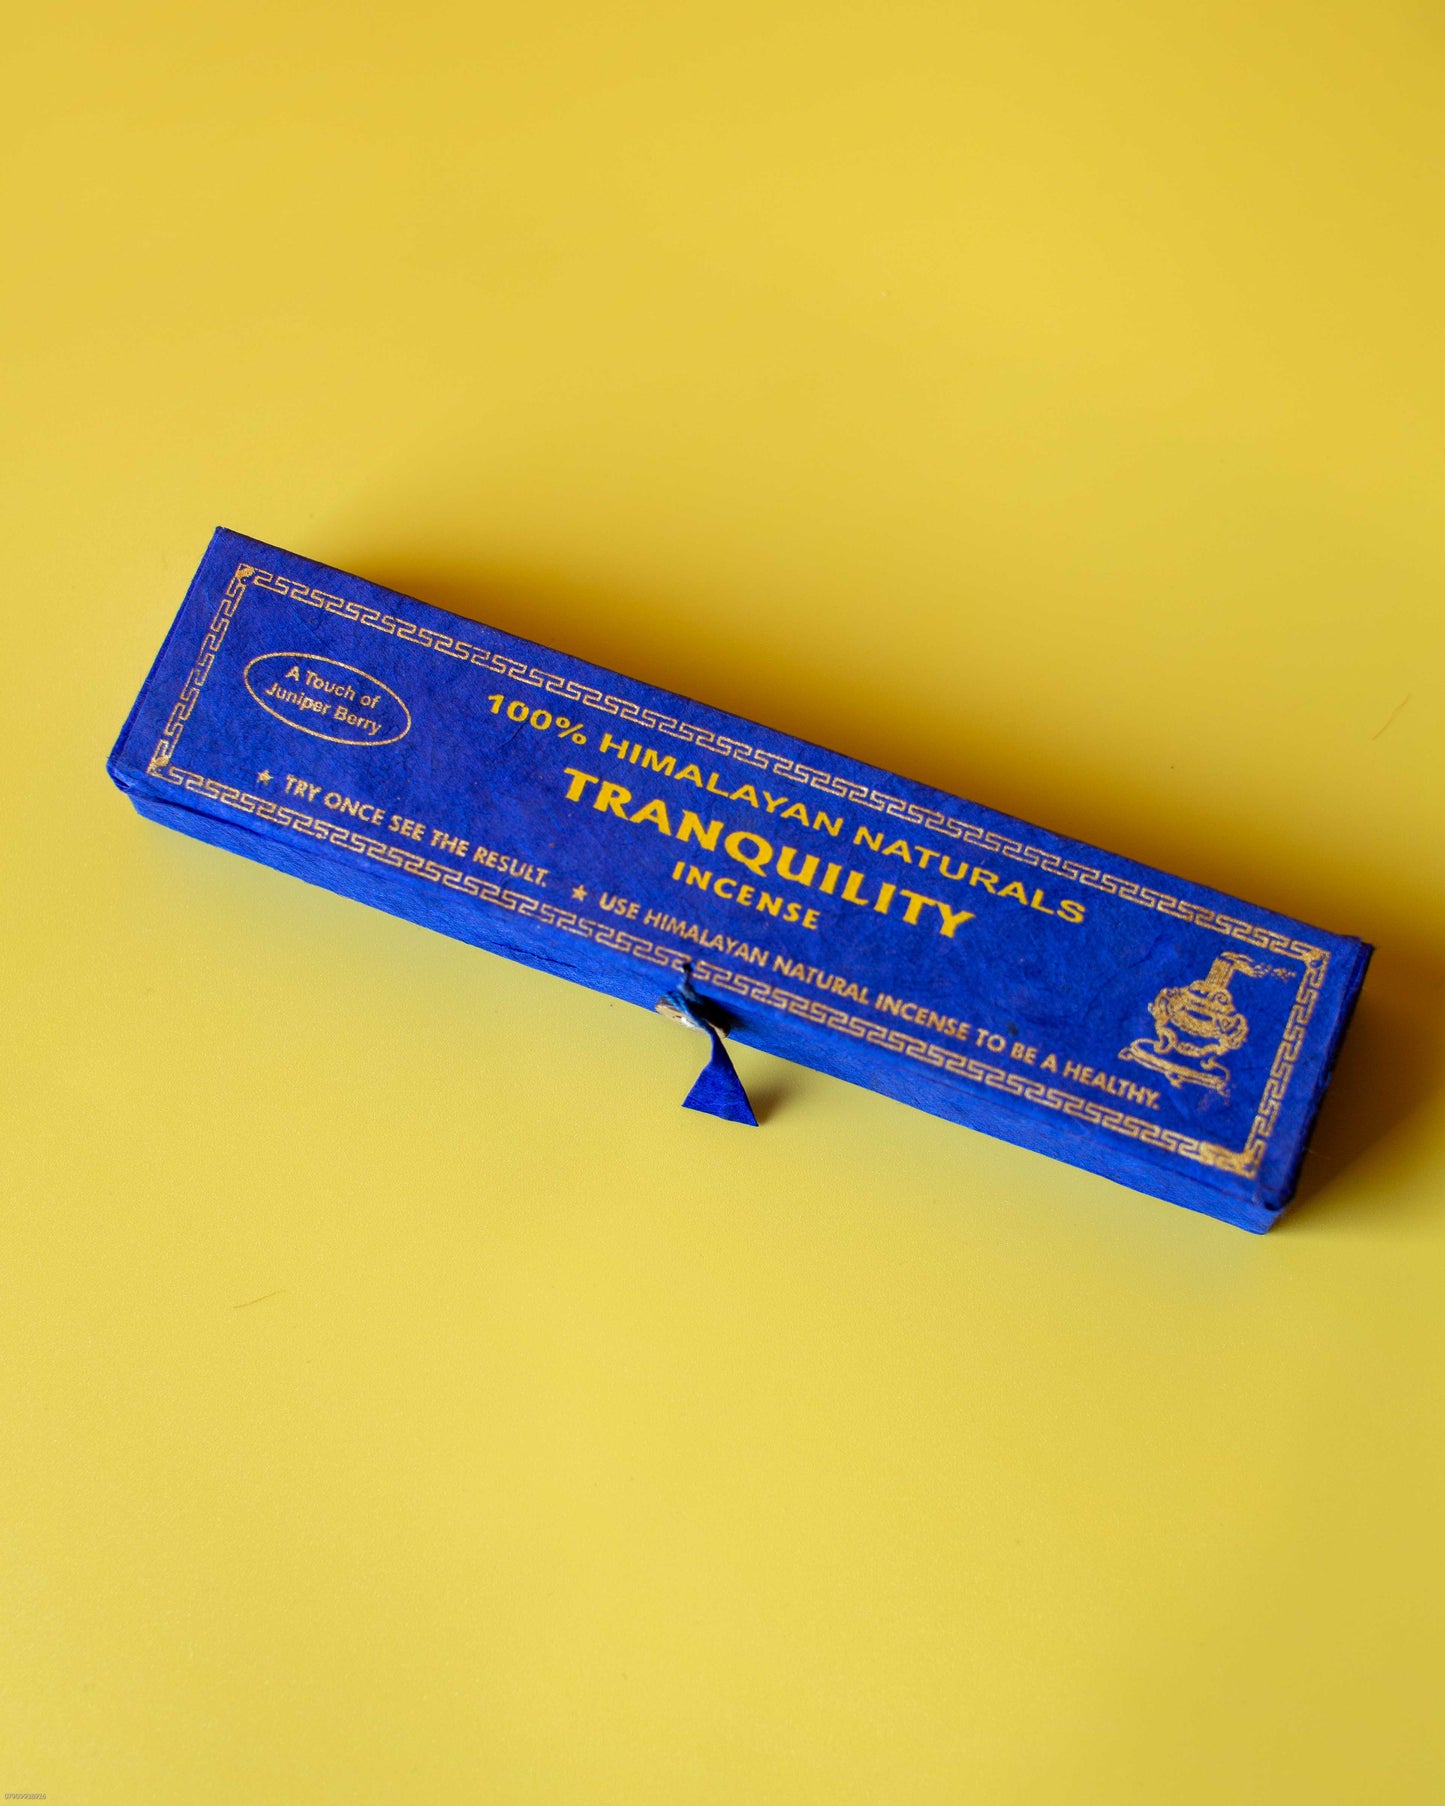 Himalayan Tranquility Incense with Holder